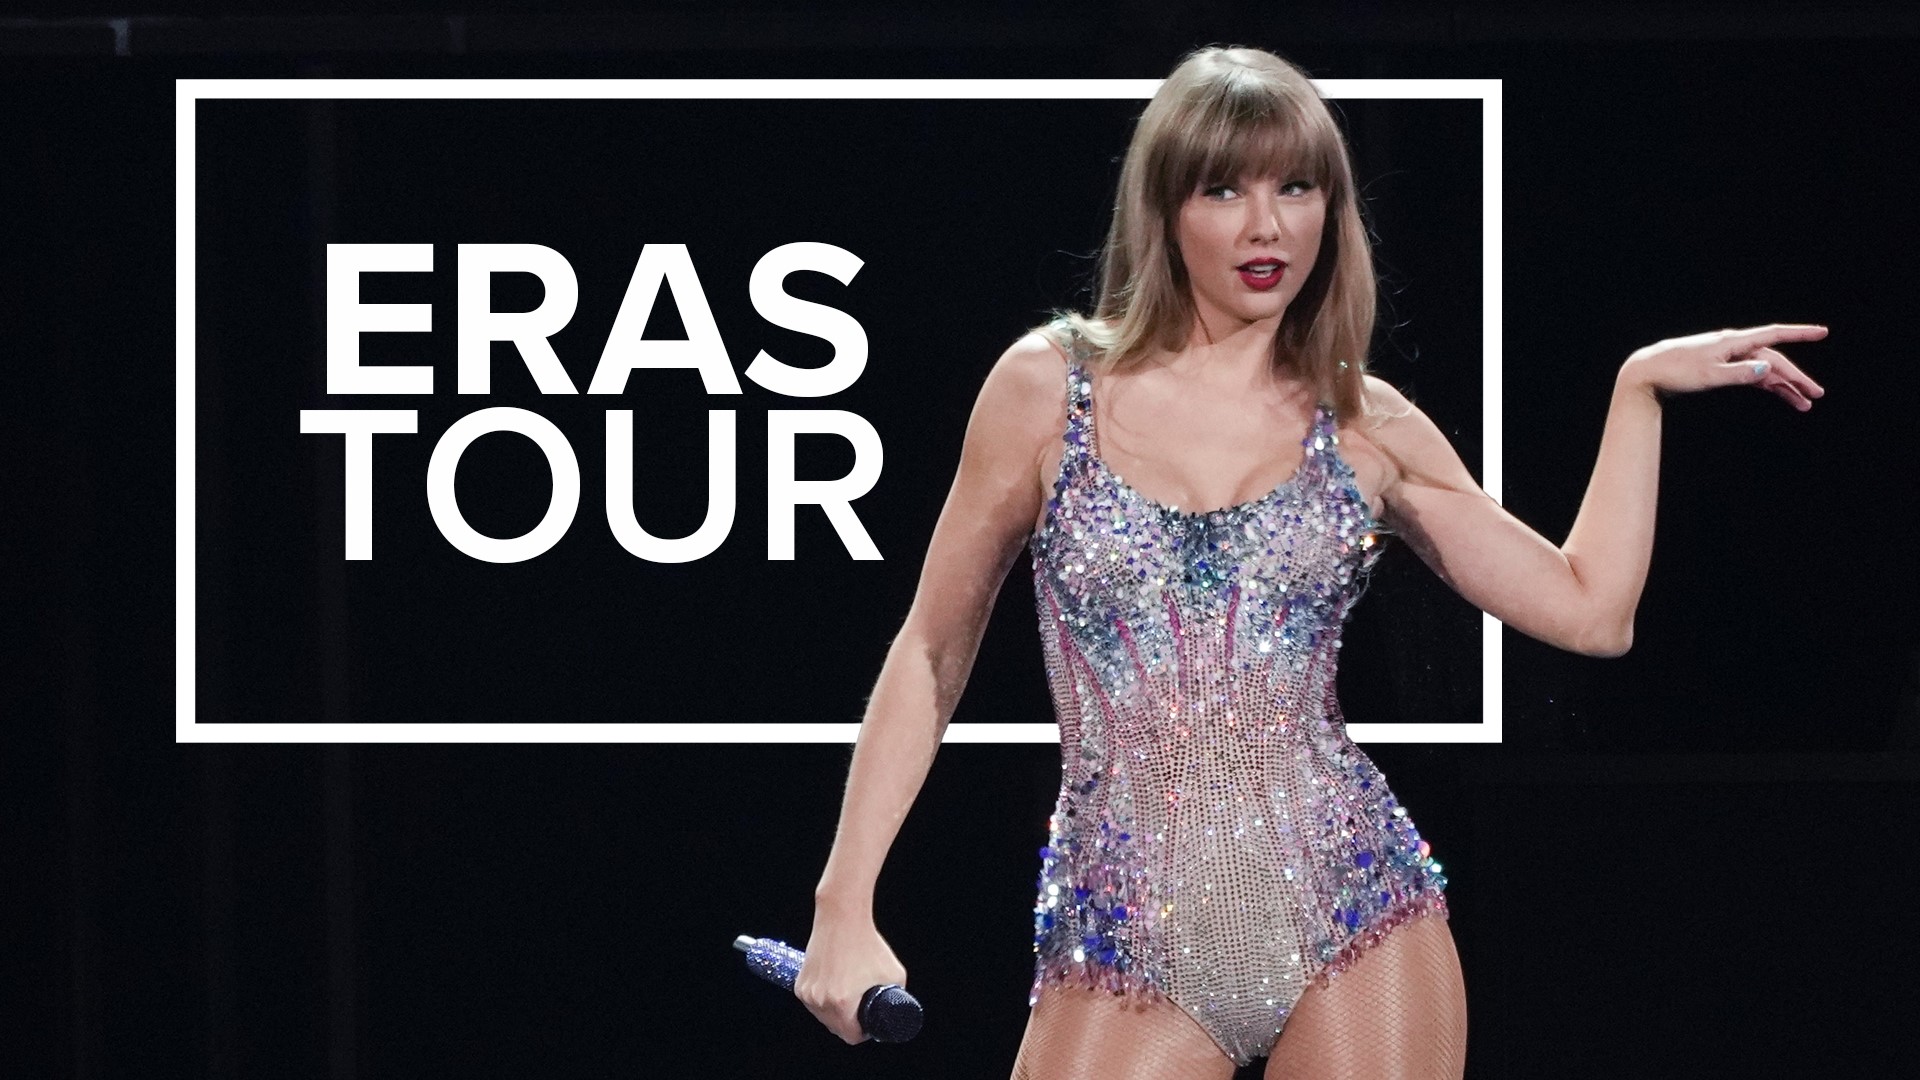 From openers to parking and bag checks to friendship bracelets, here's what you should know if you're planning to see Taylor Swift on her record-breaking Eras Tour.